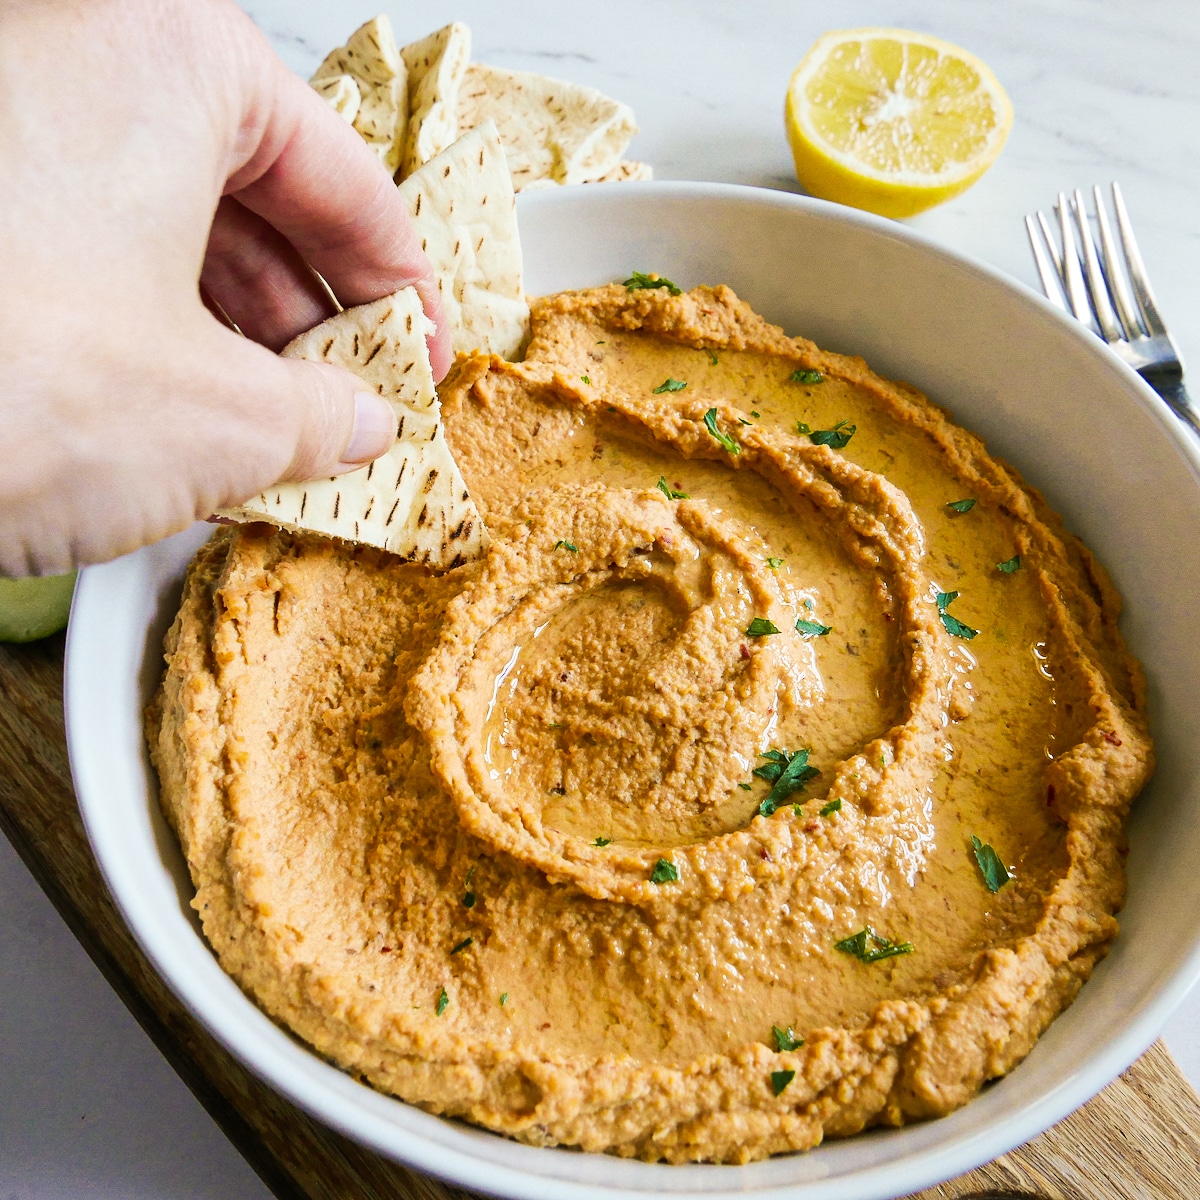 Dipping a pita chip into a large bowl of homemade hummus.